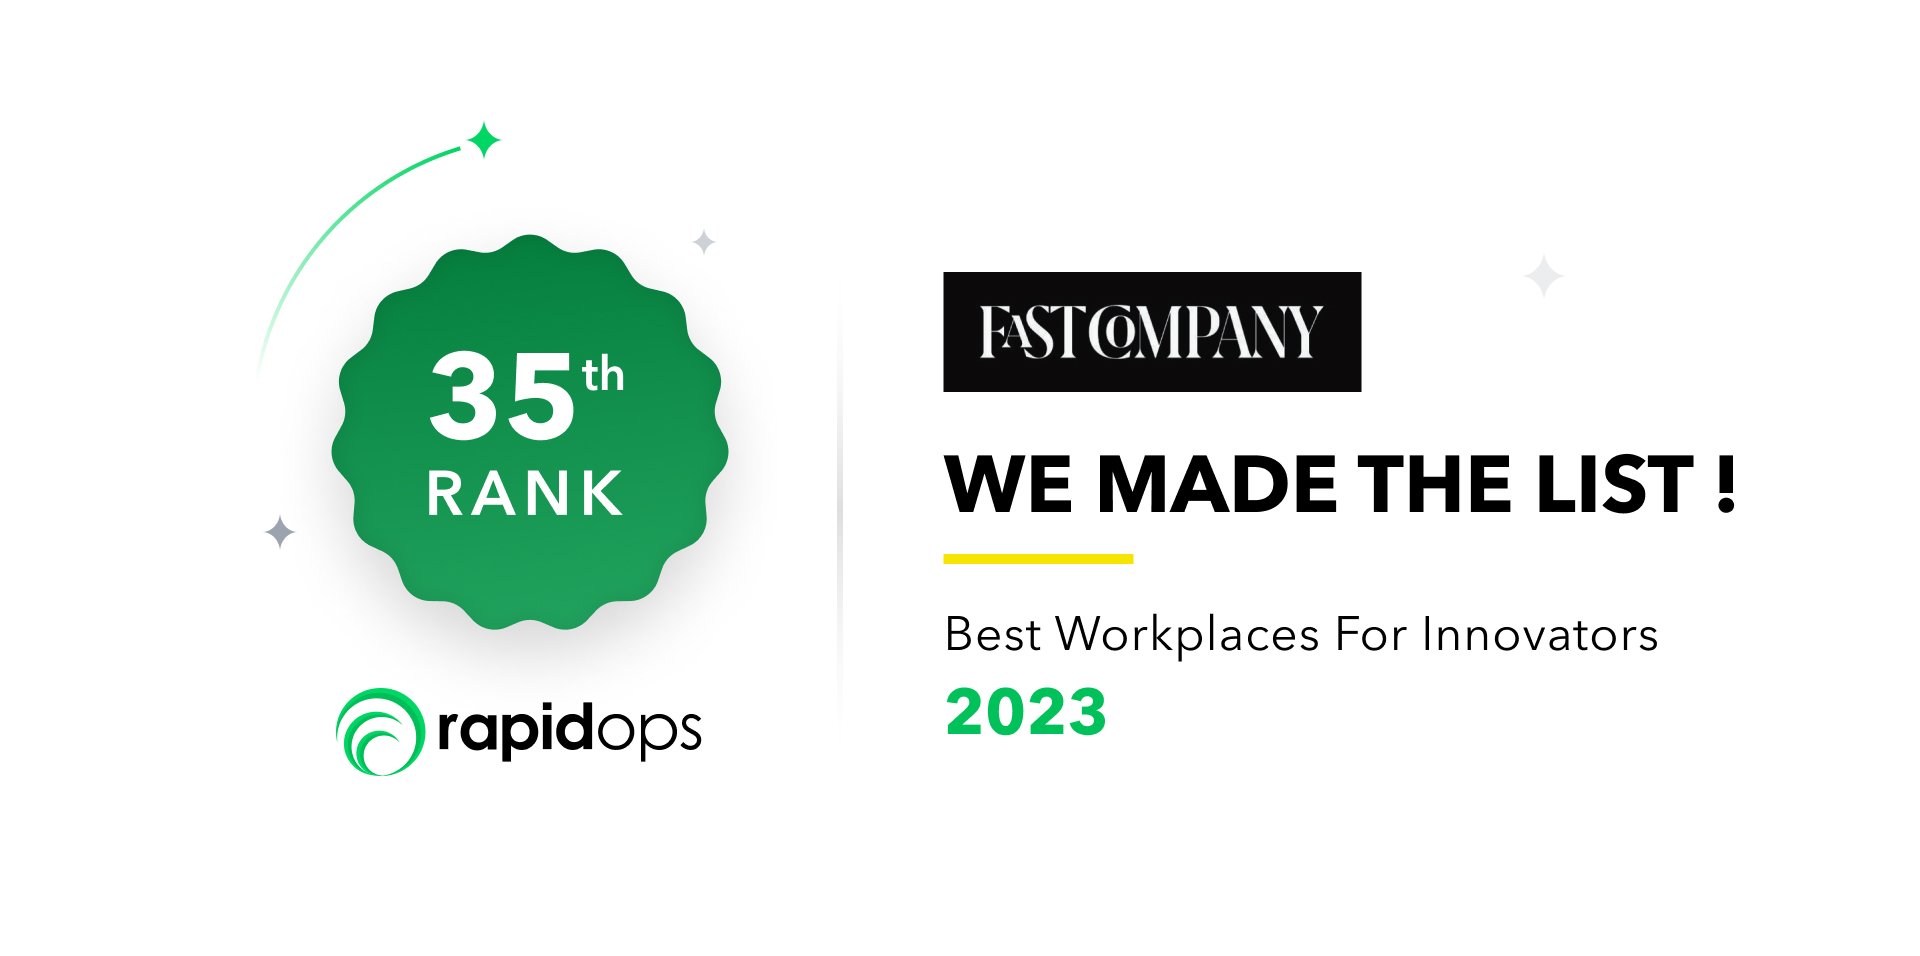 Rapidops ranked 35th on Fast Company's list of best workplaces for innovators